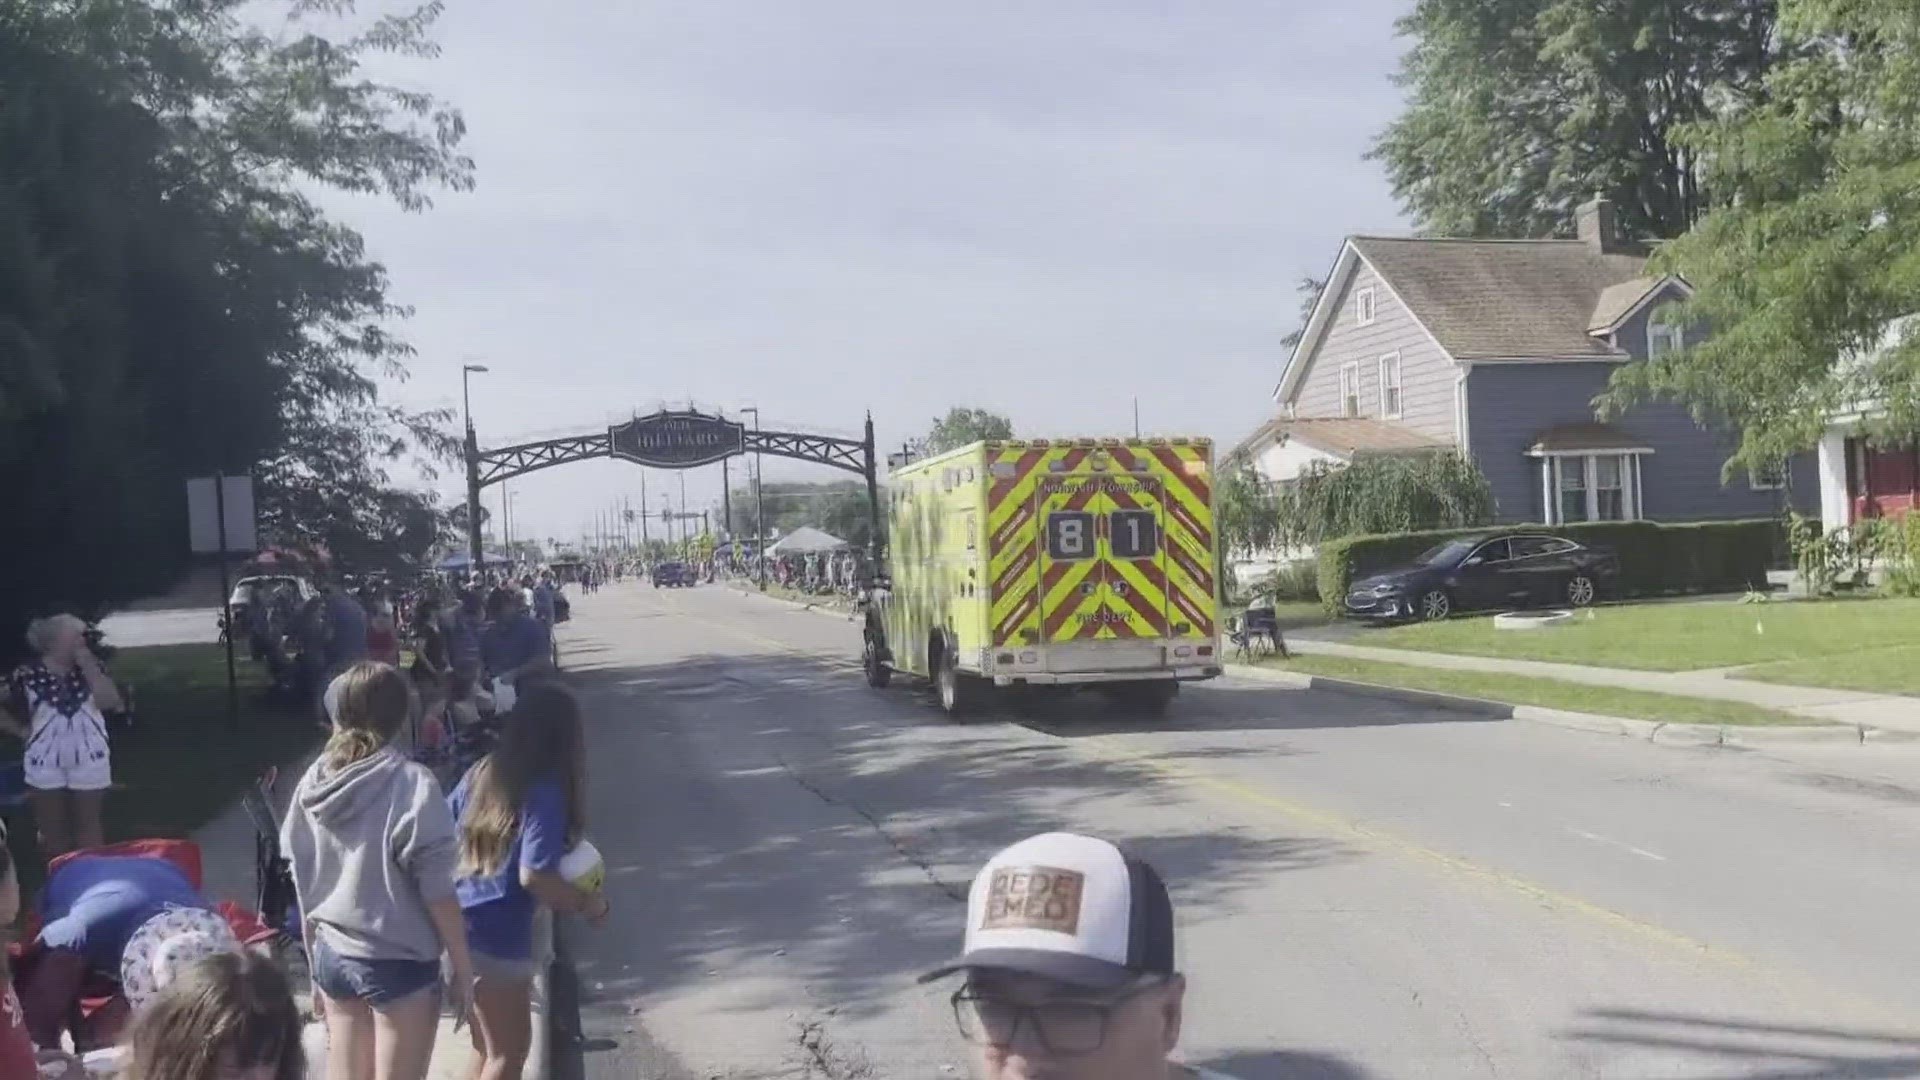 A young girl was seriously injured after she was struck by a vehicle during the Fourth of July parade in Hilliard.